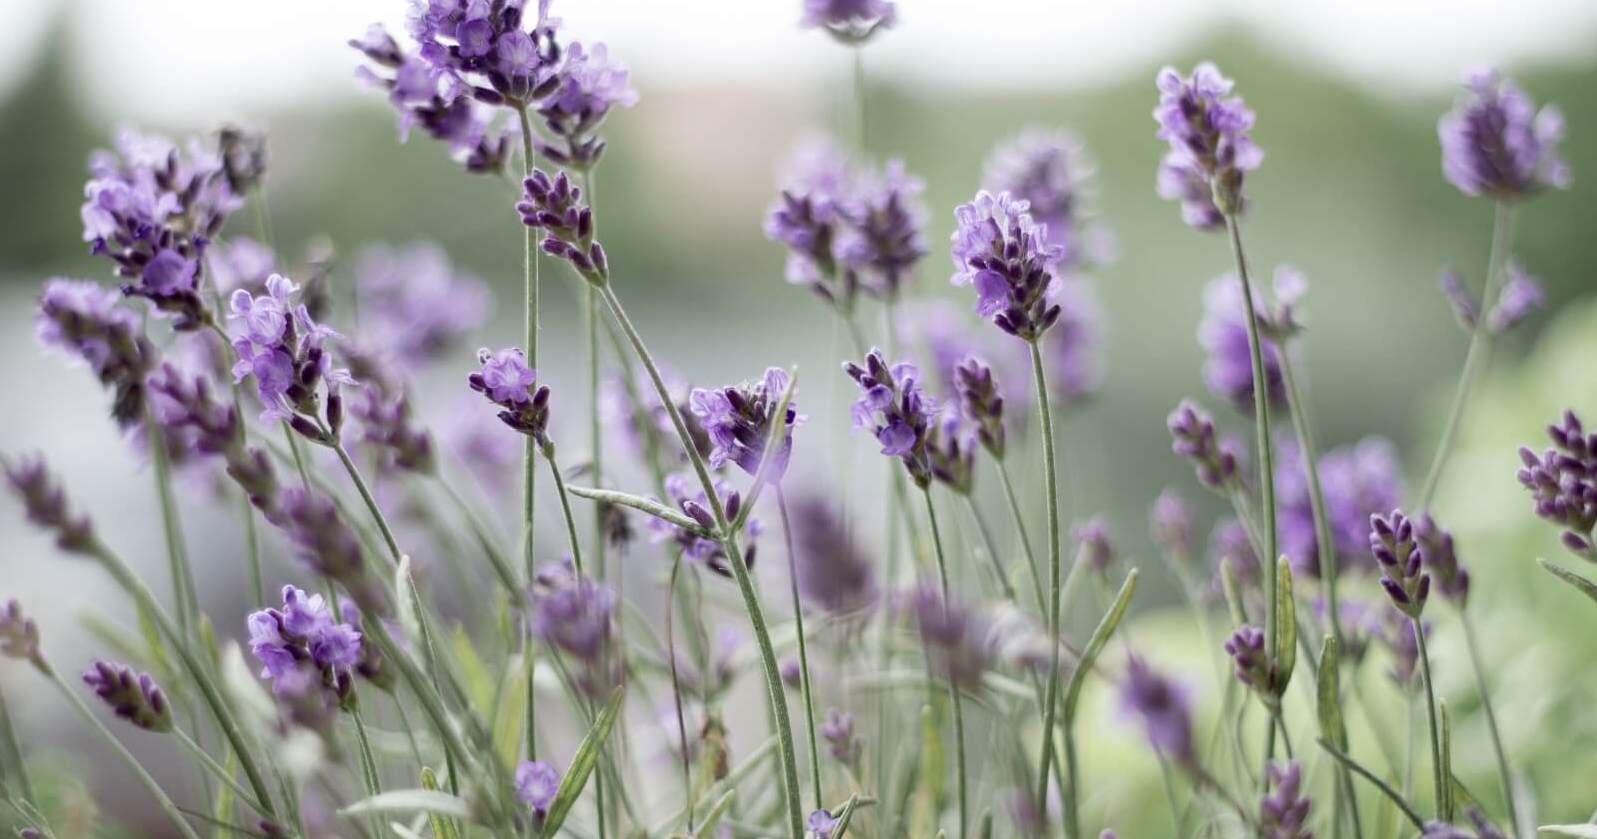 Lavender flowers blooming in a sunlit field, representing the multifaceted health benefits of the lavender plant.